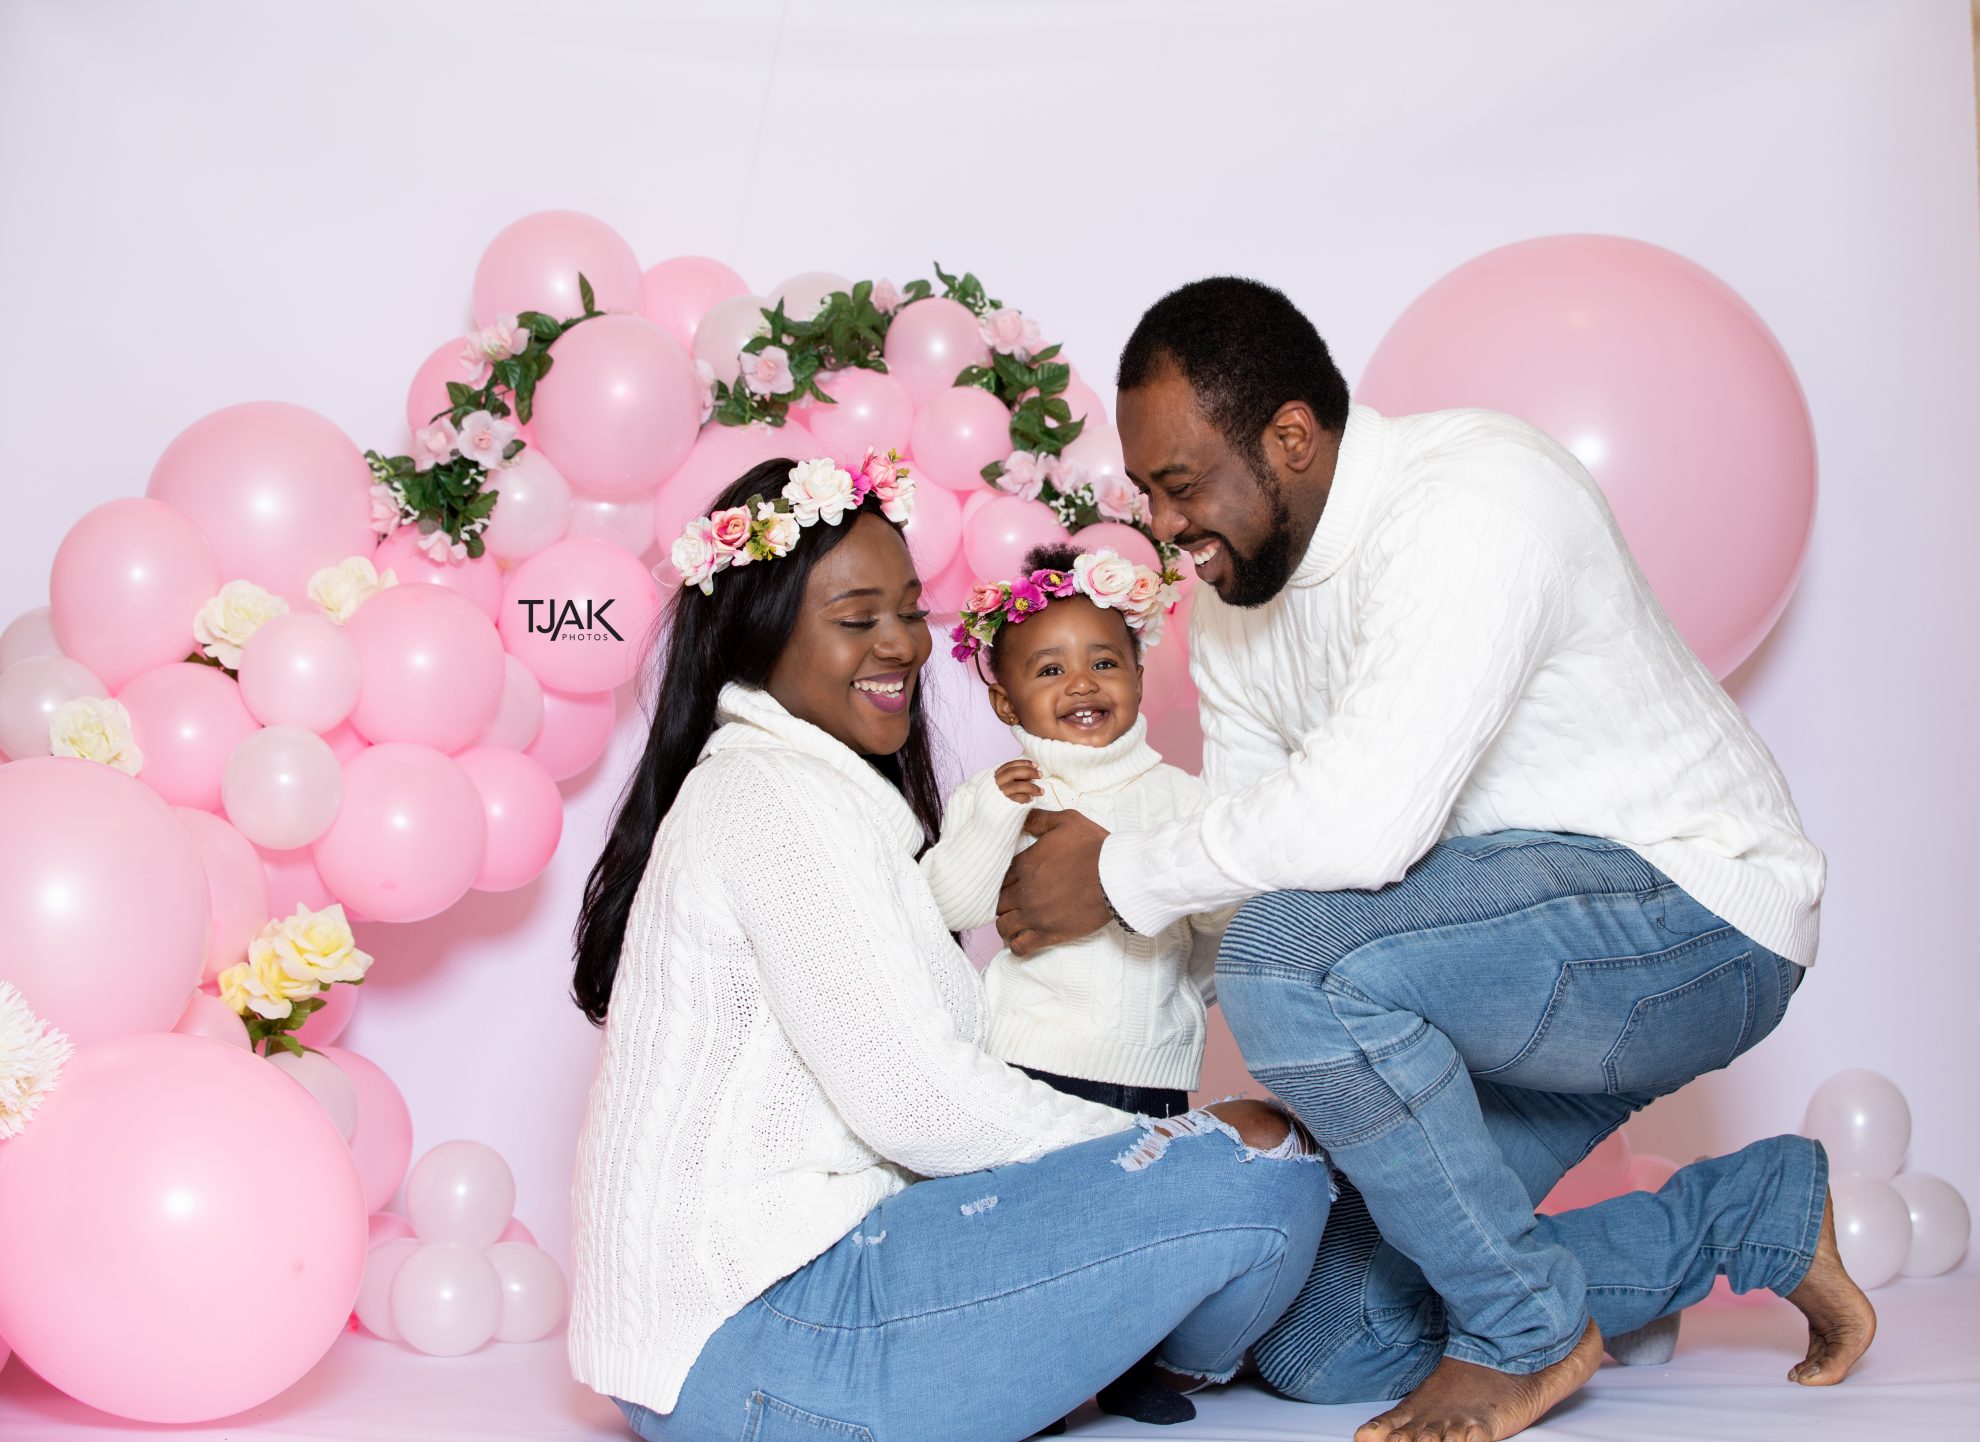 Newborn photographer, Maternity shoot Photographer, and Pregnancy photographer in Laurel, MD, Baltimore, and Washington, D.C.